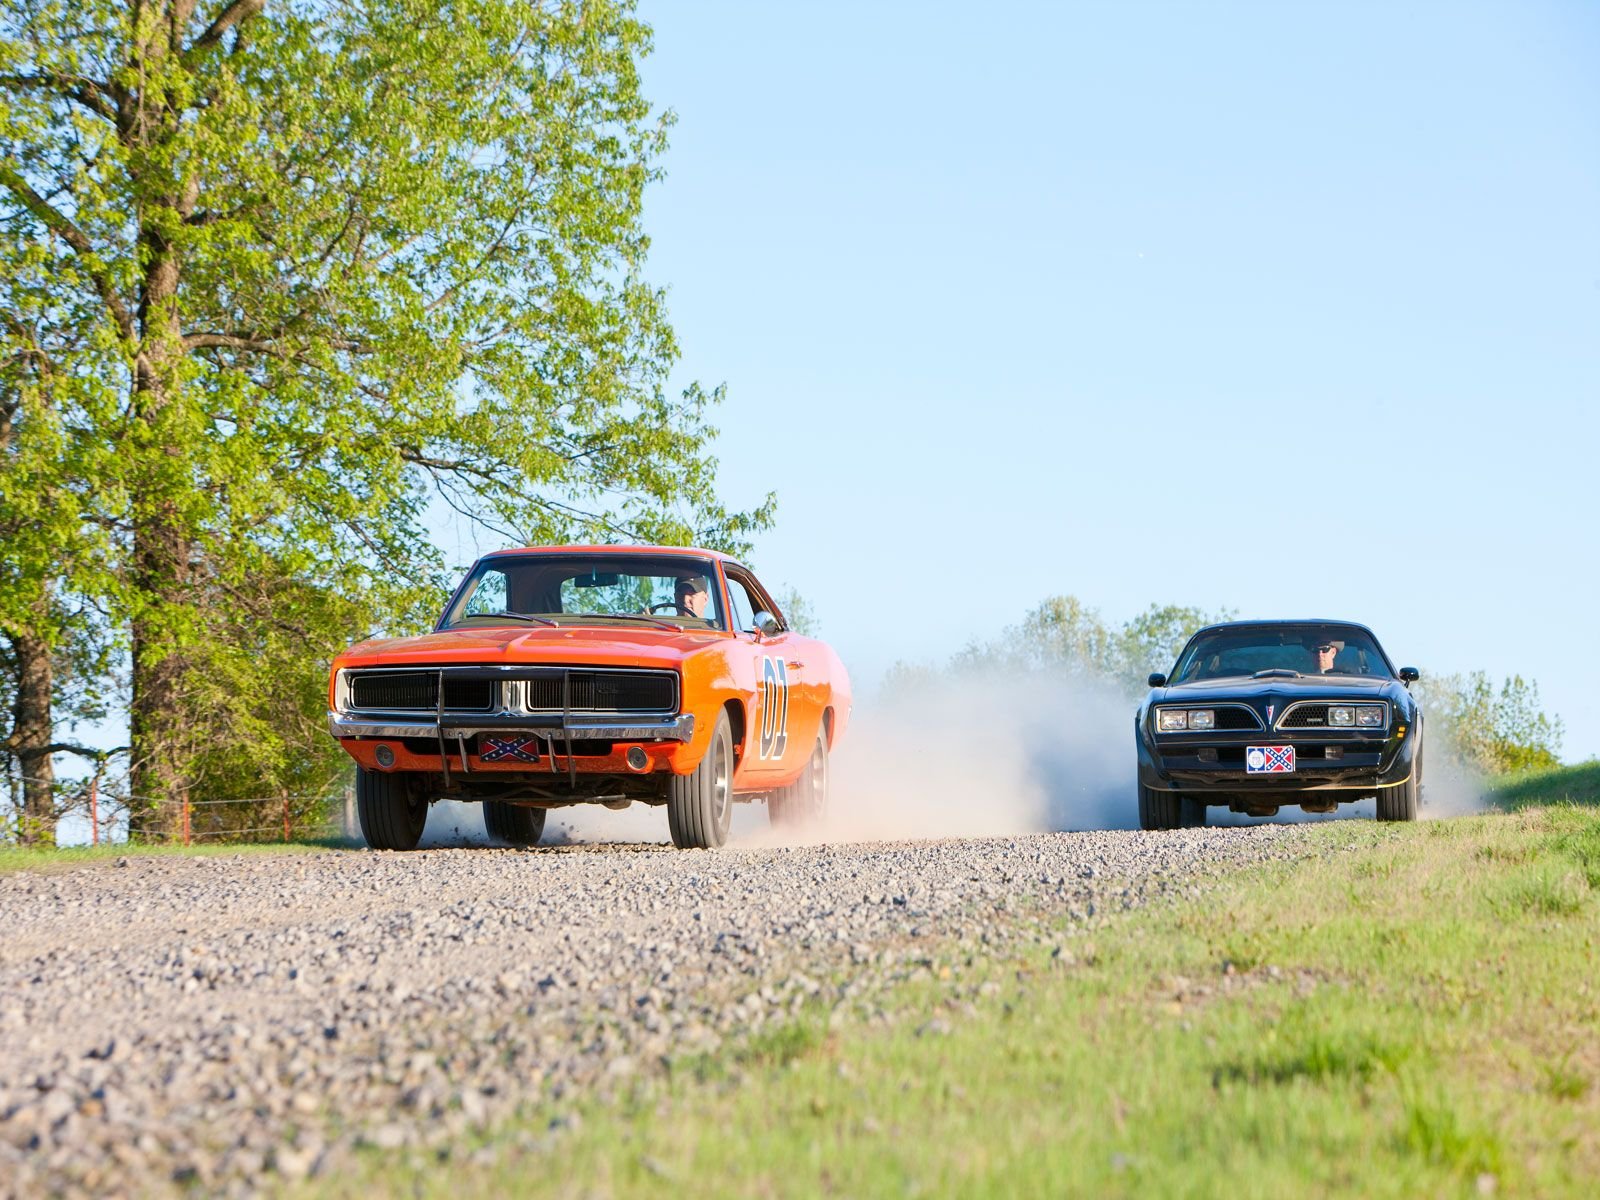 general, Lee, Dukes, Hazzard, Dodge, Charger, Muscle, Hot, Rod, Rods, Television, Series, Smokey, Bandit Wallpaper